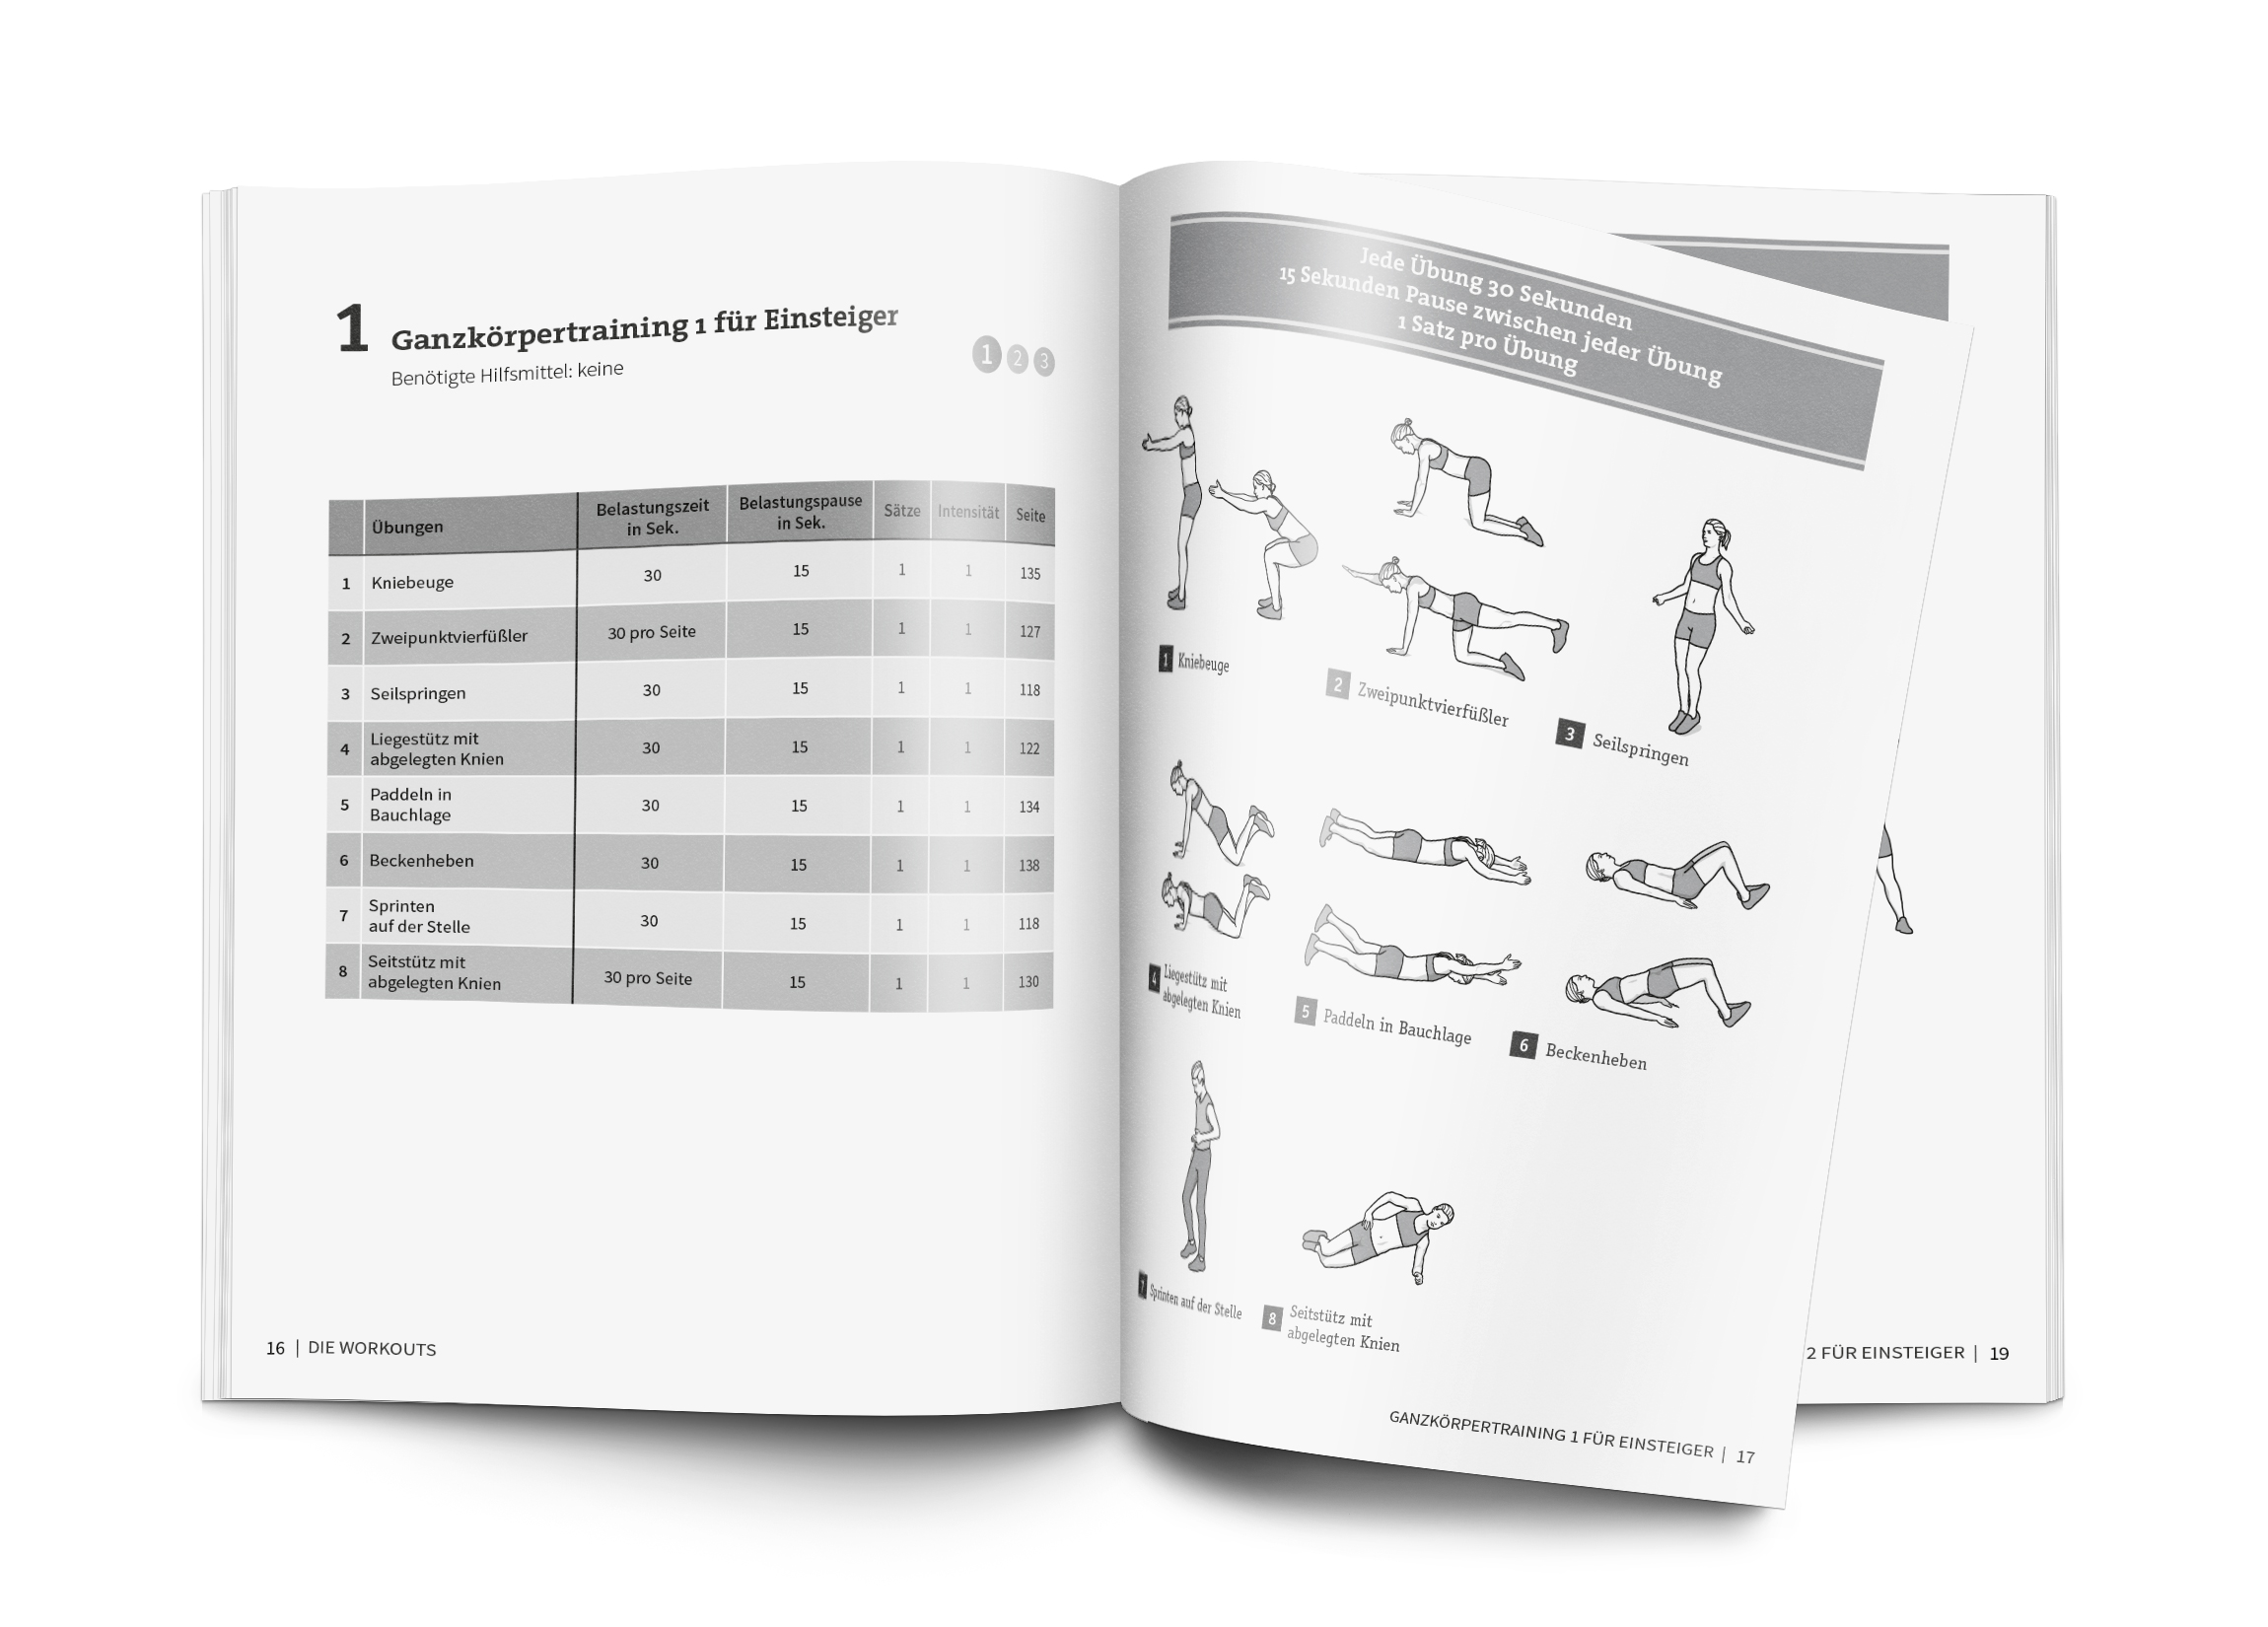 50 Workouts - Fit in 7 Minutes (Book)